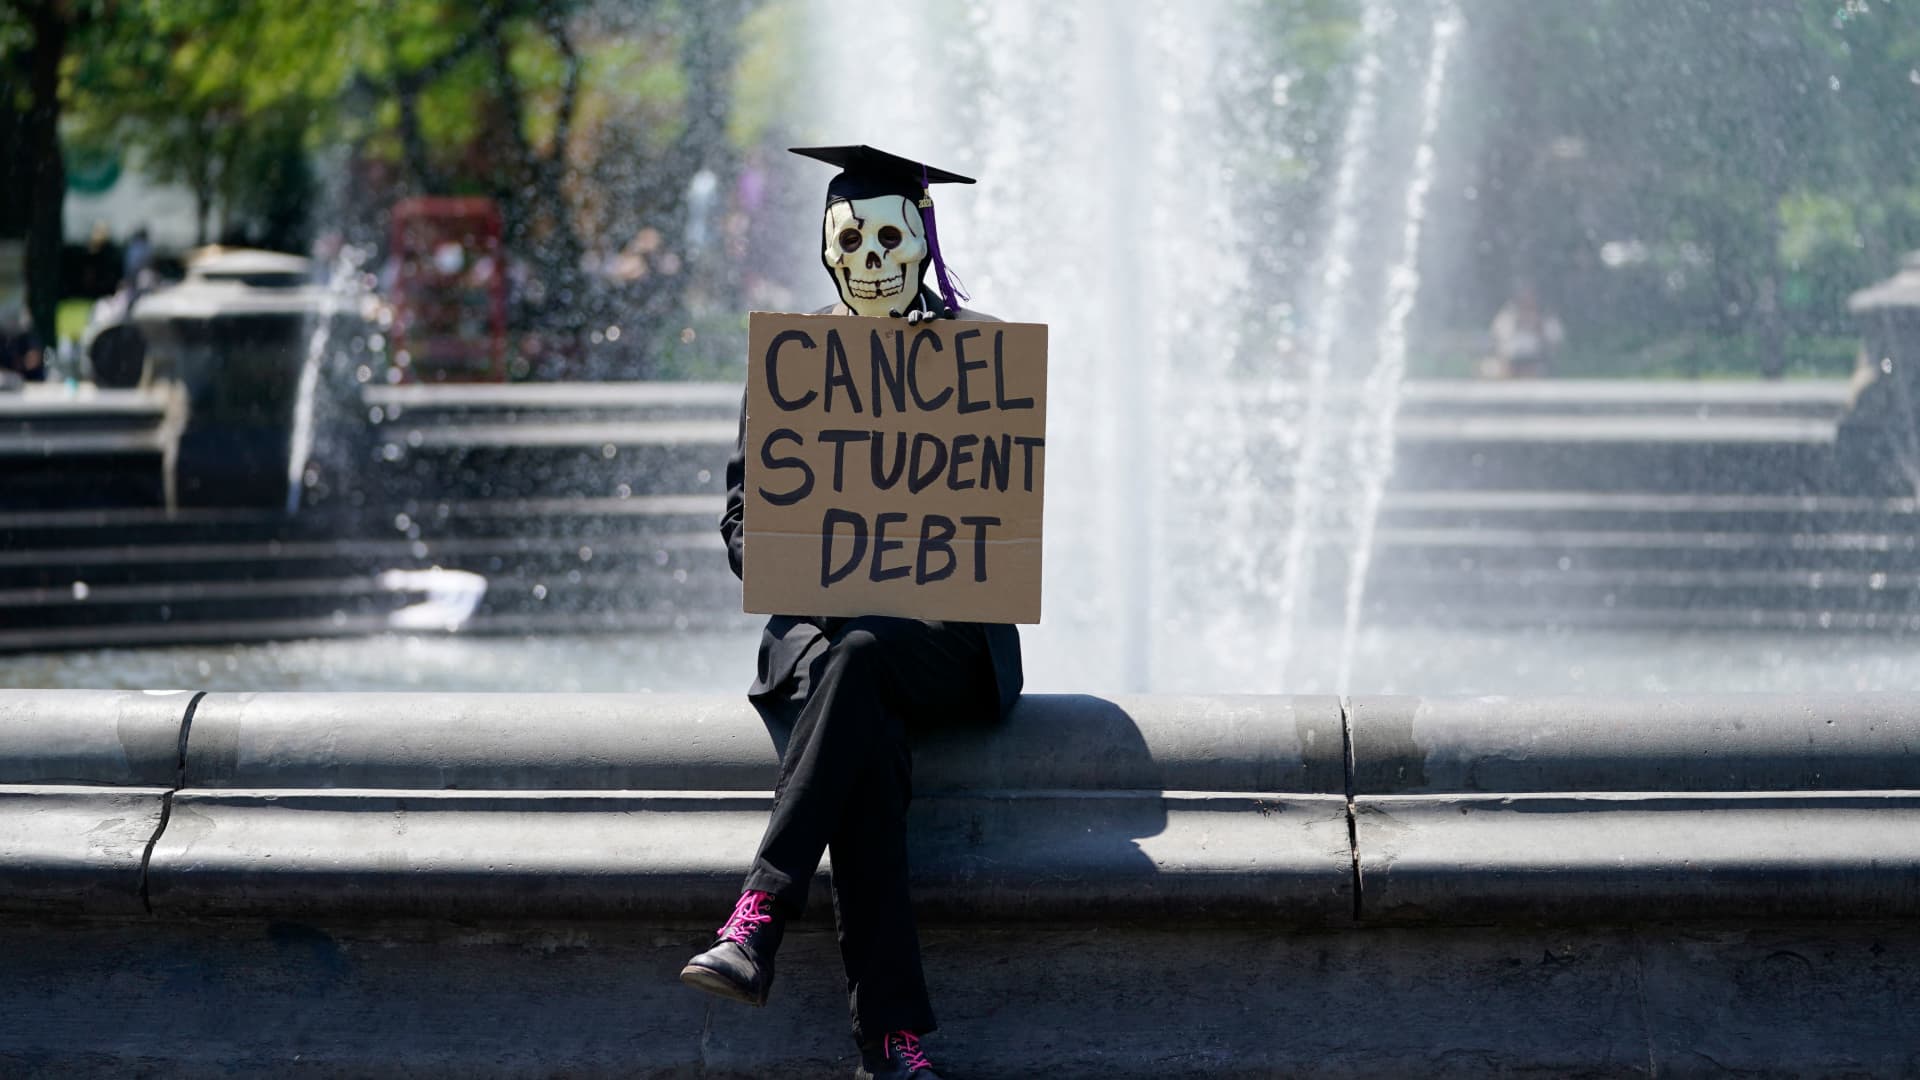 In a reversal, the Education Department is now excluding millions from student loan relief